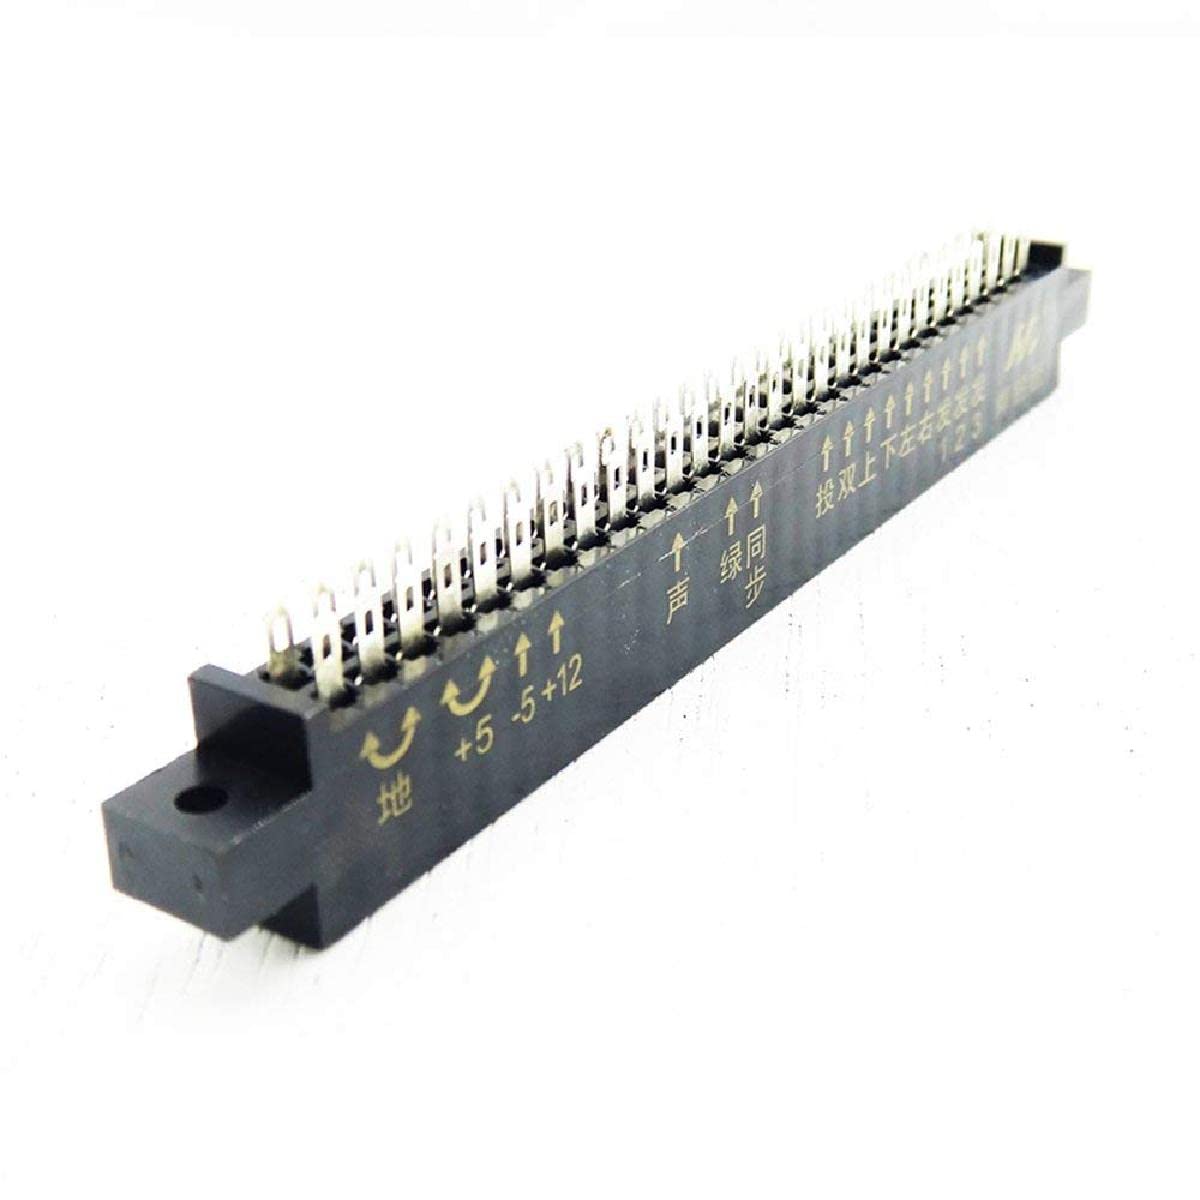 MOUDOAUER 28/56 Pin Female Connector Video Game Parts Arcade Machine Connection Converter Game Accessory